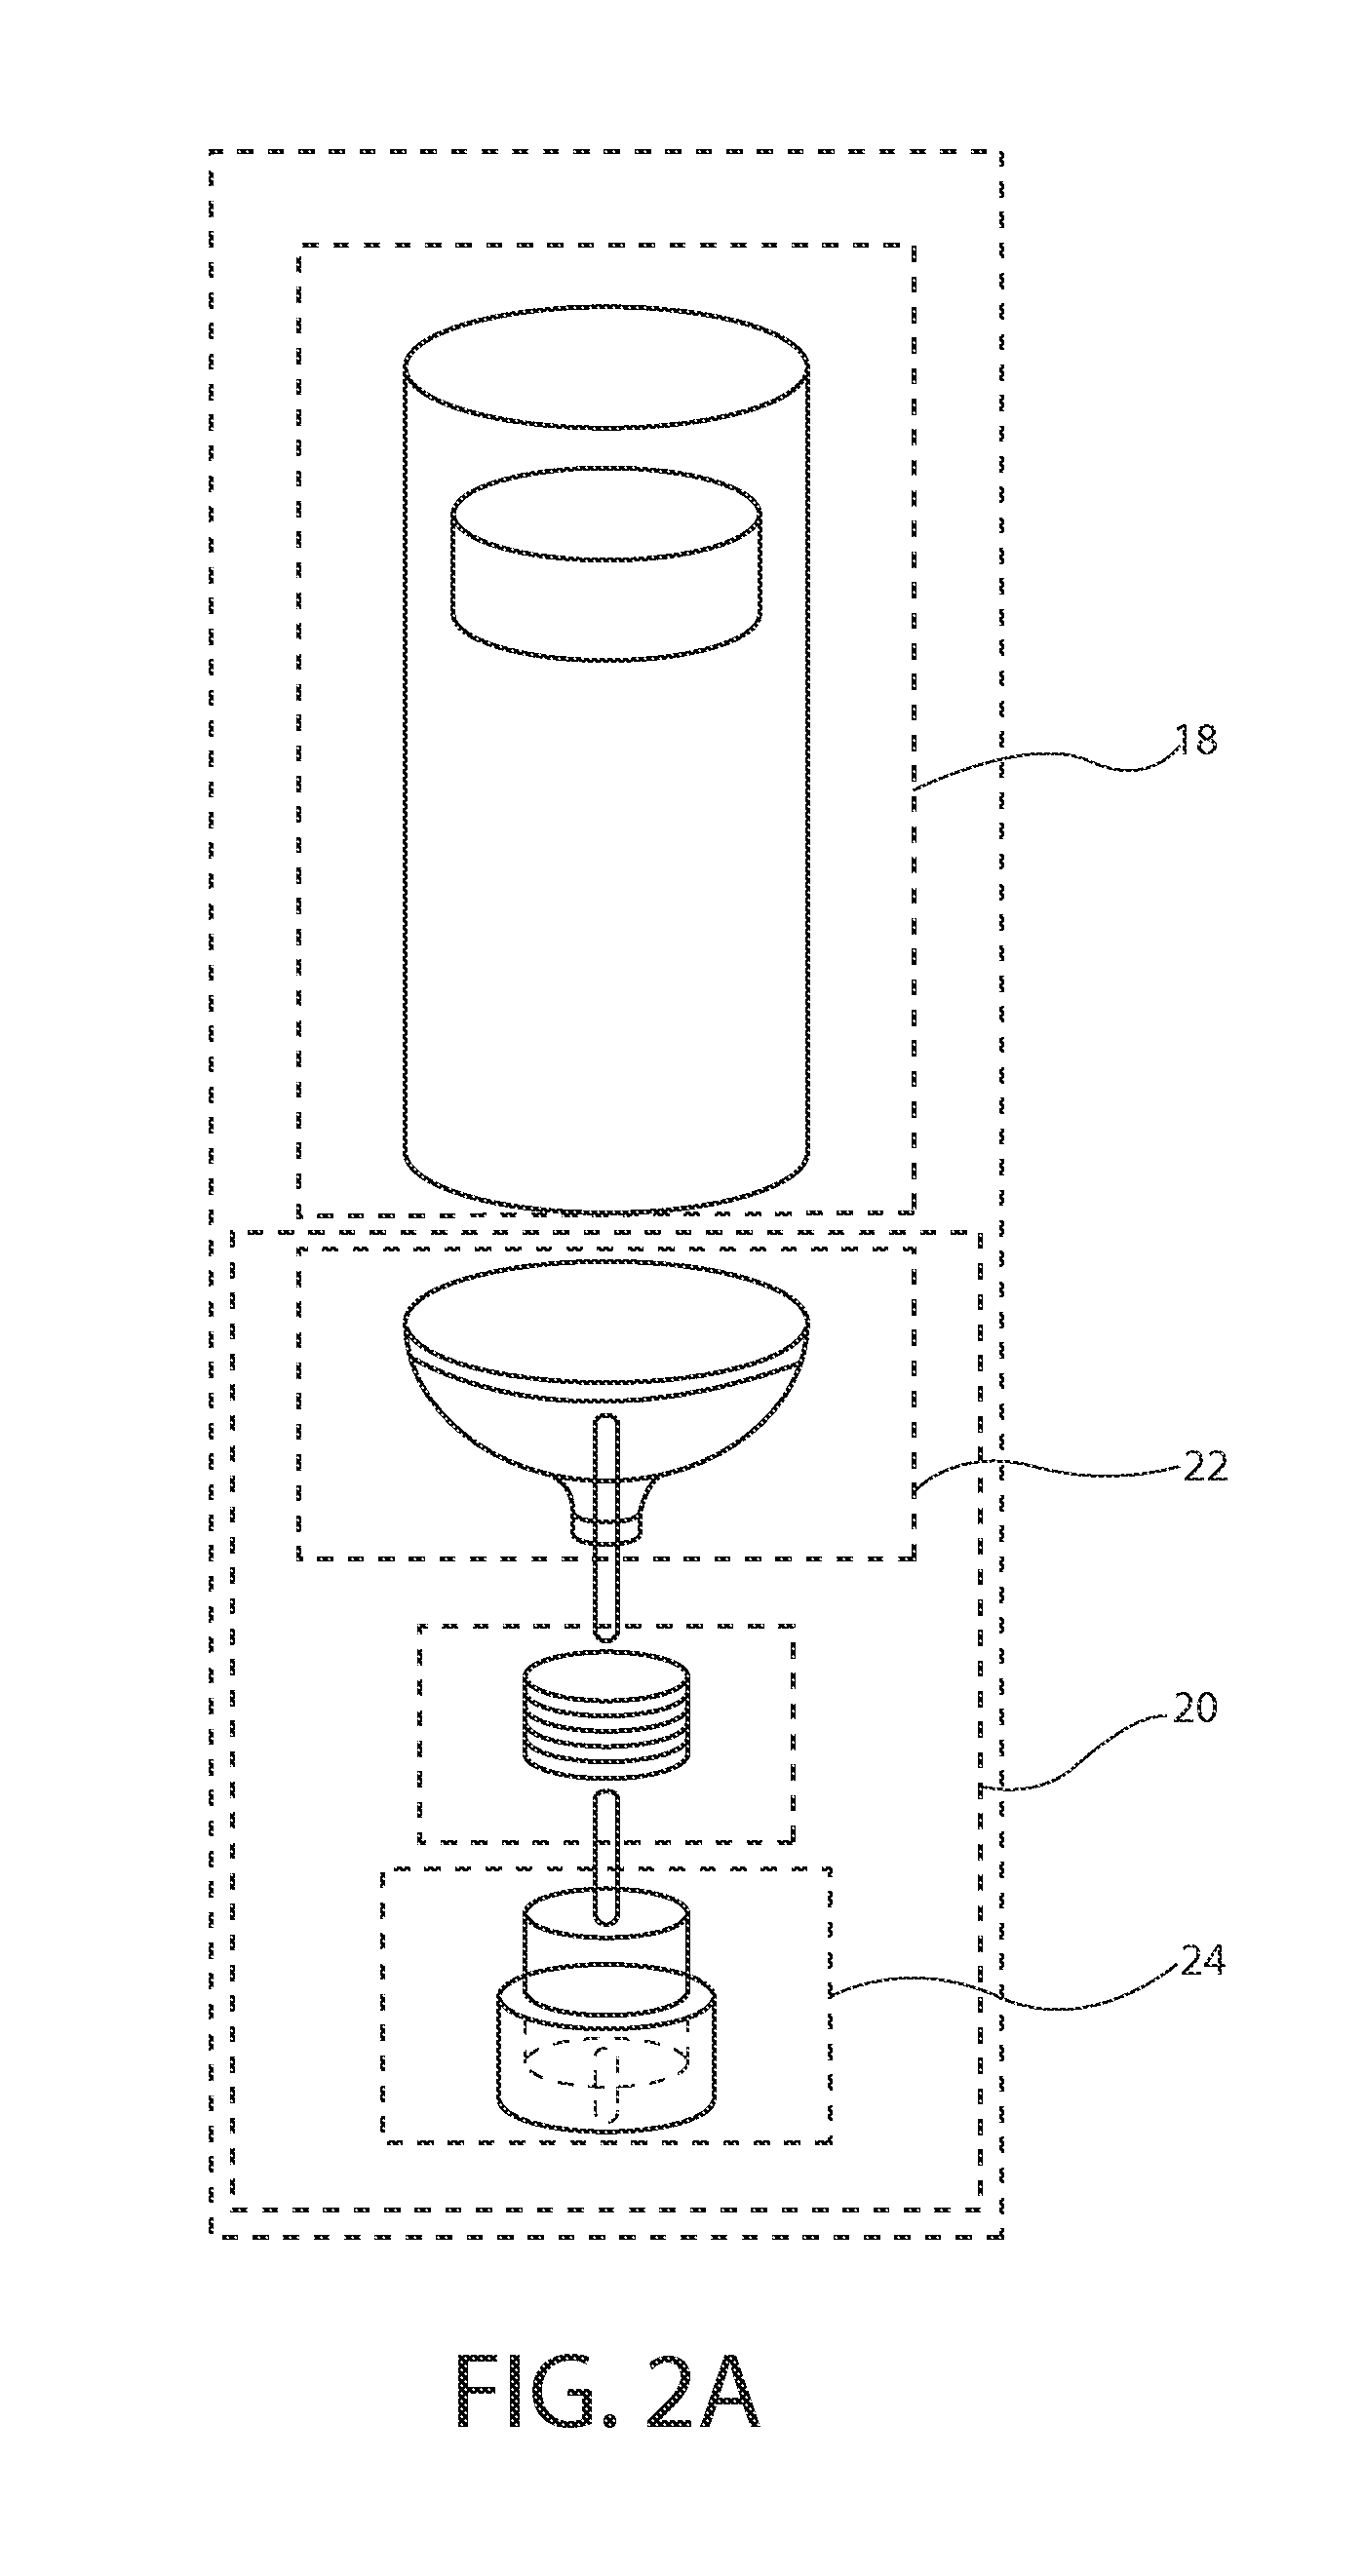 Fill-finish cartridges for sterile fluid pathway assemblies and drug delivery devices incorporating fill-finish cartridges